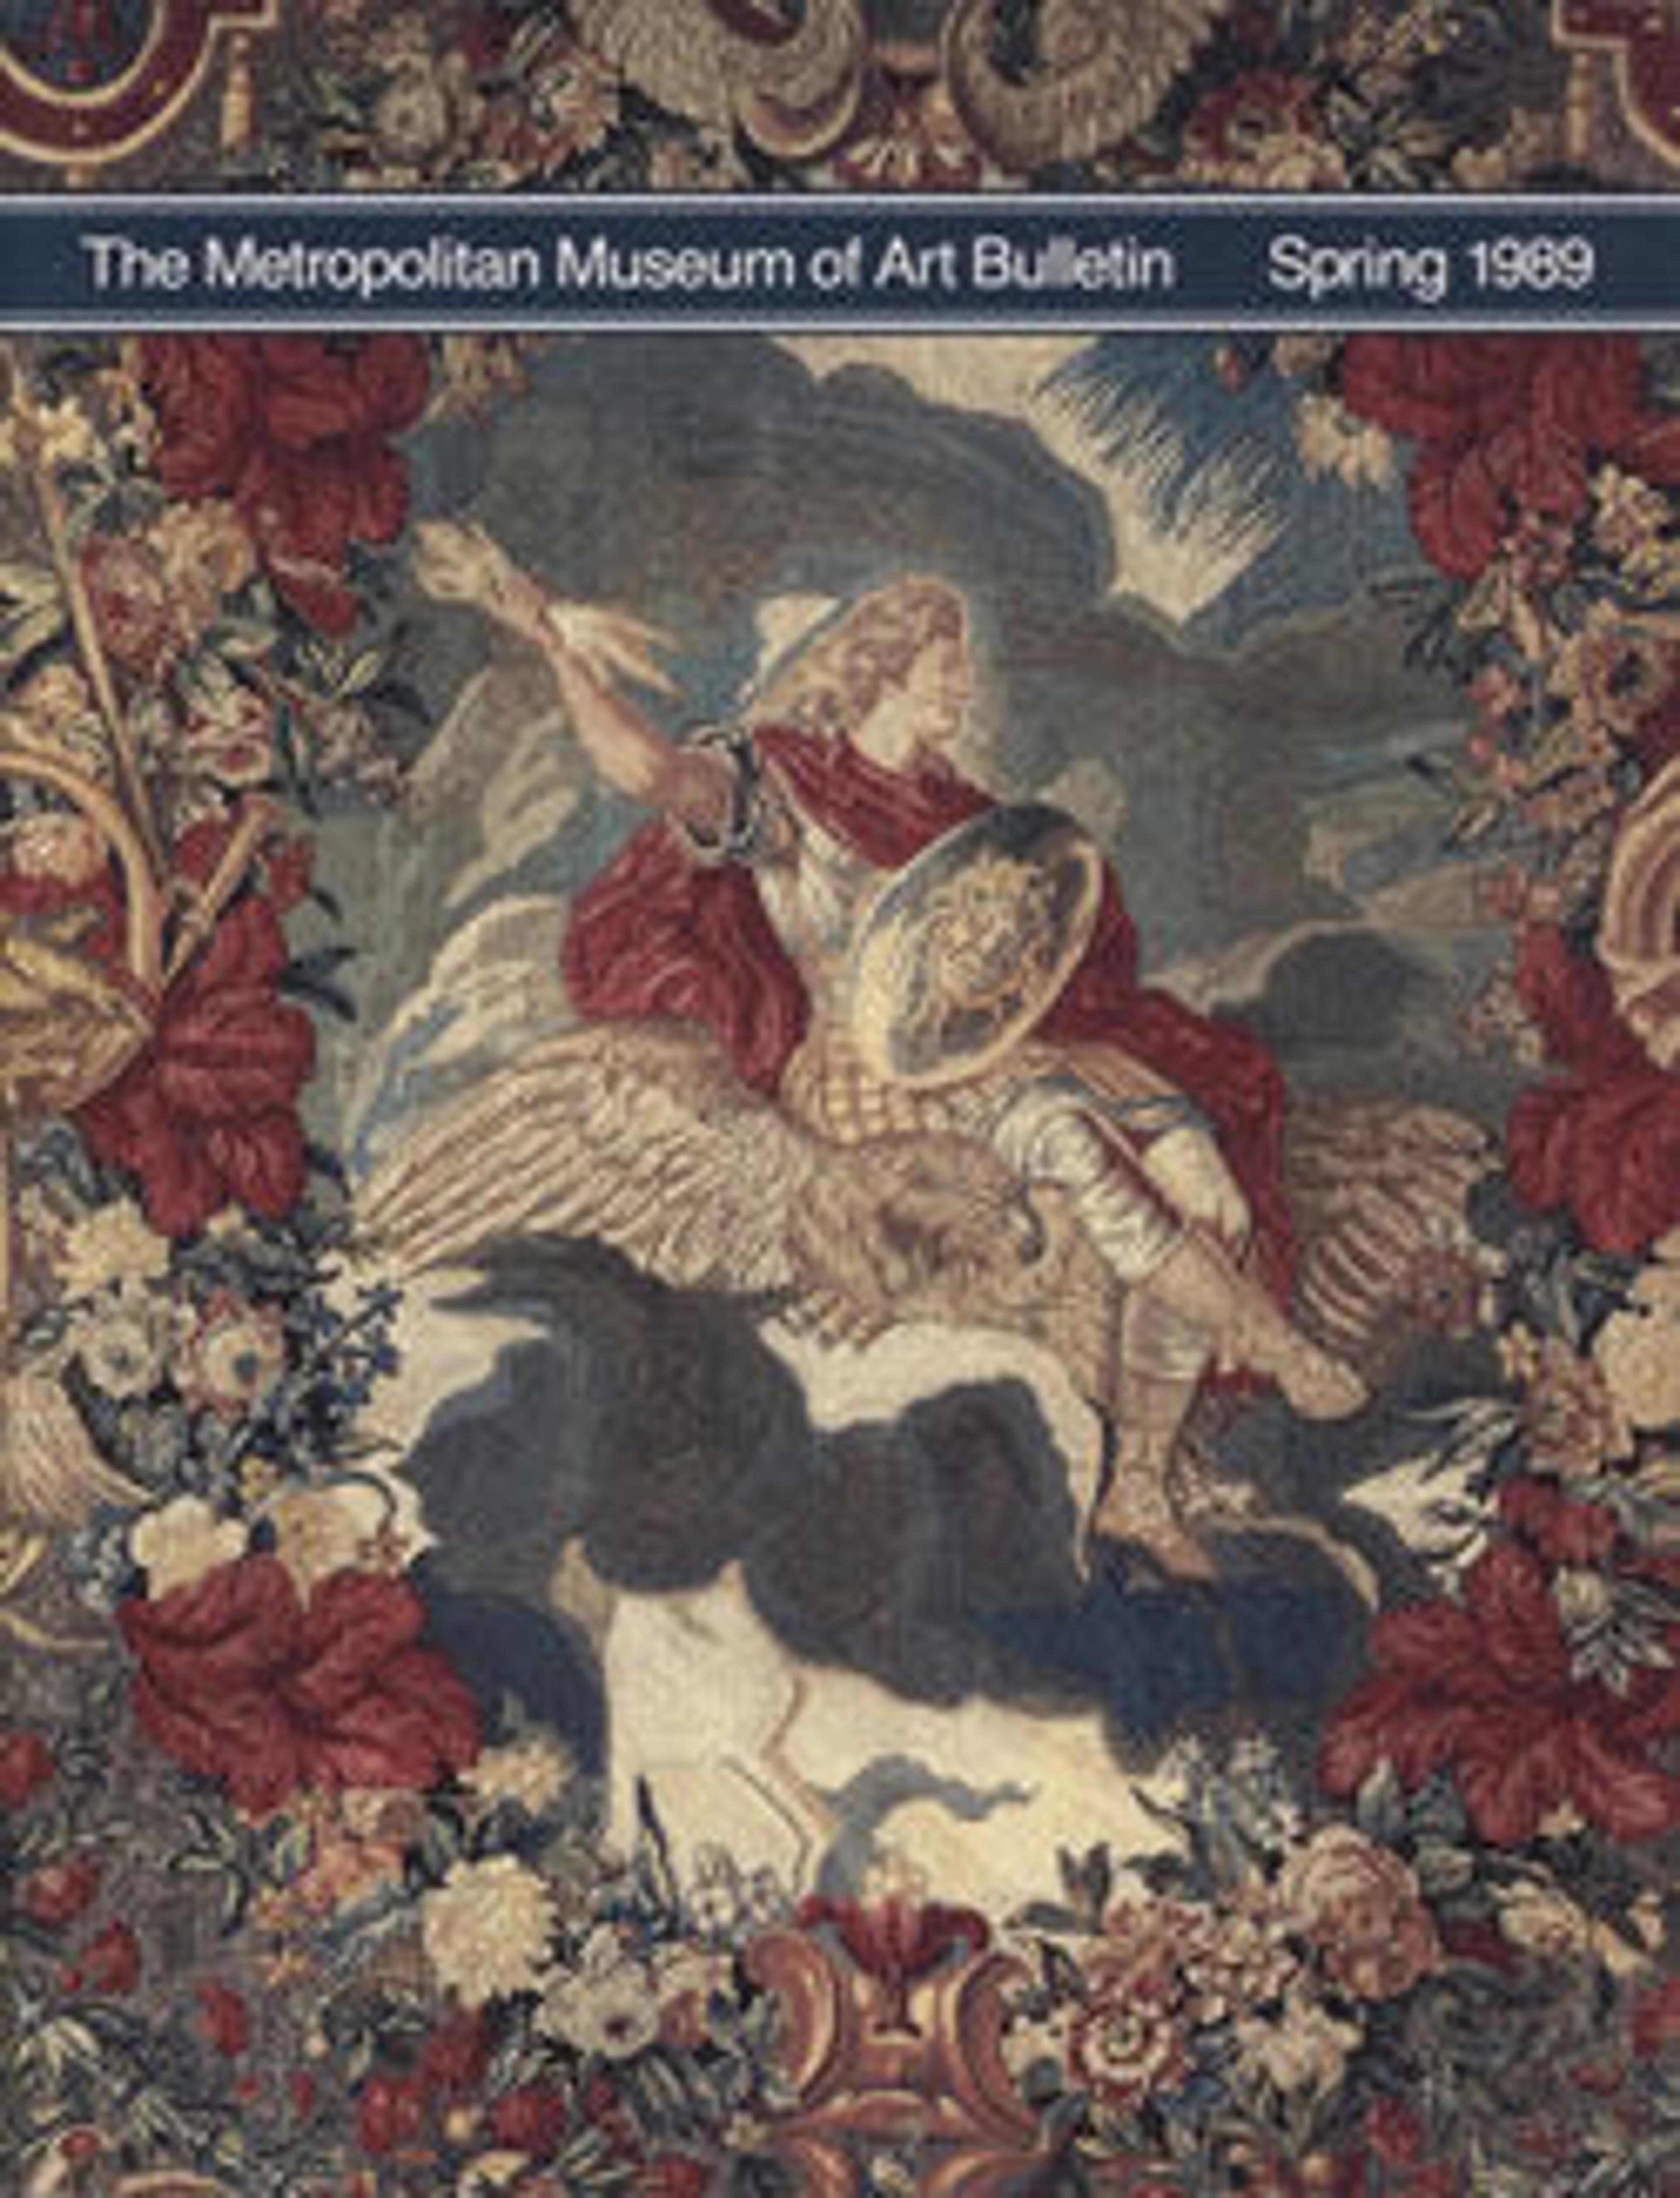 "French Decorative Arts During the Reign of Louis XIV: 1654-1715": The Metropolitan Museum of Art Bulletin, v. 46, no. 4 (Spring, 1989)